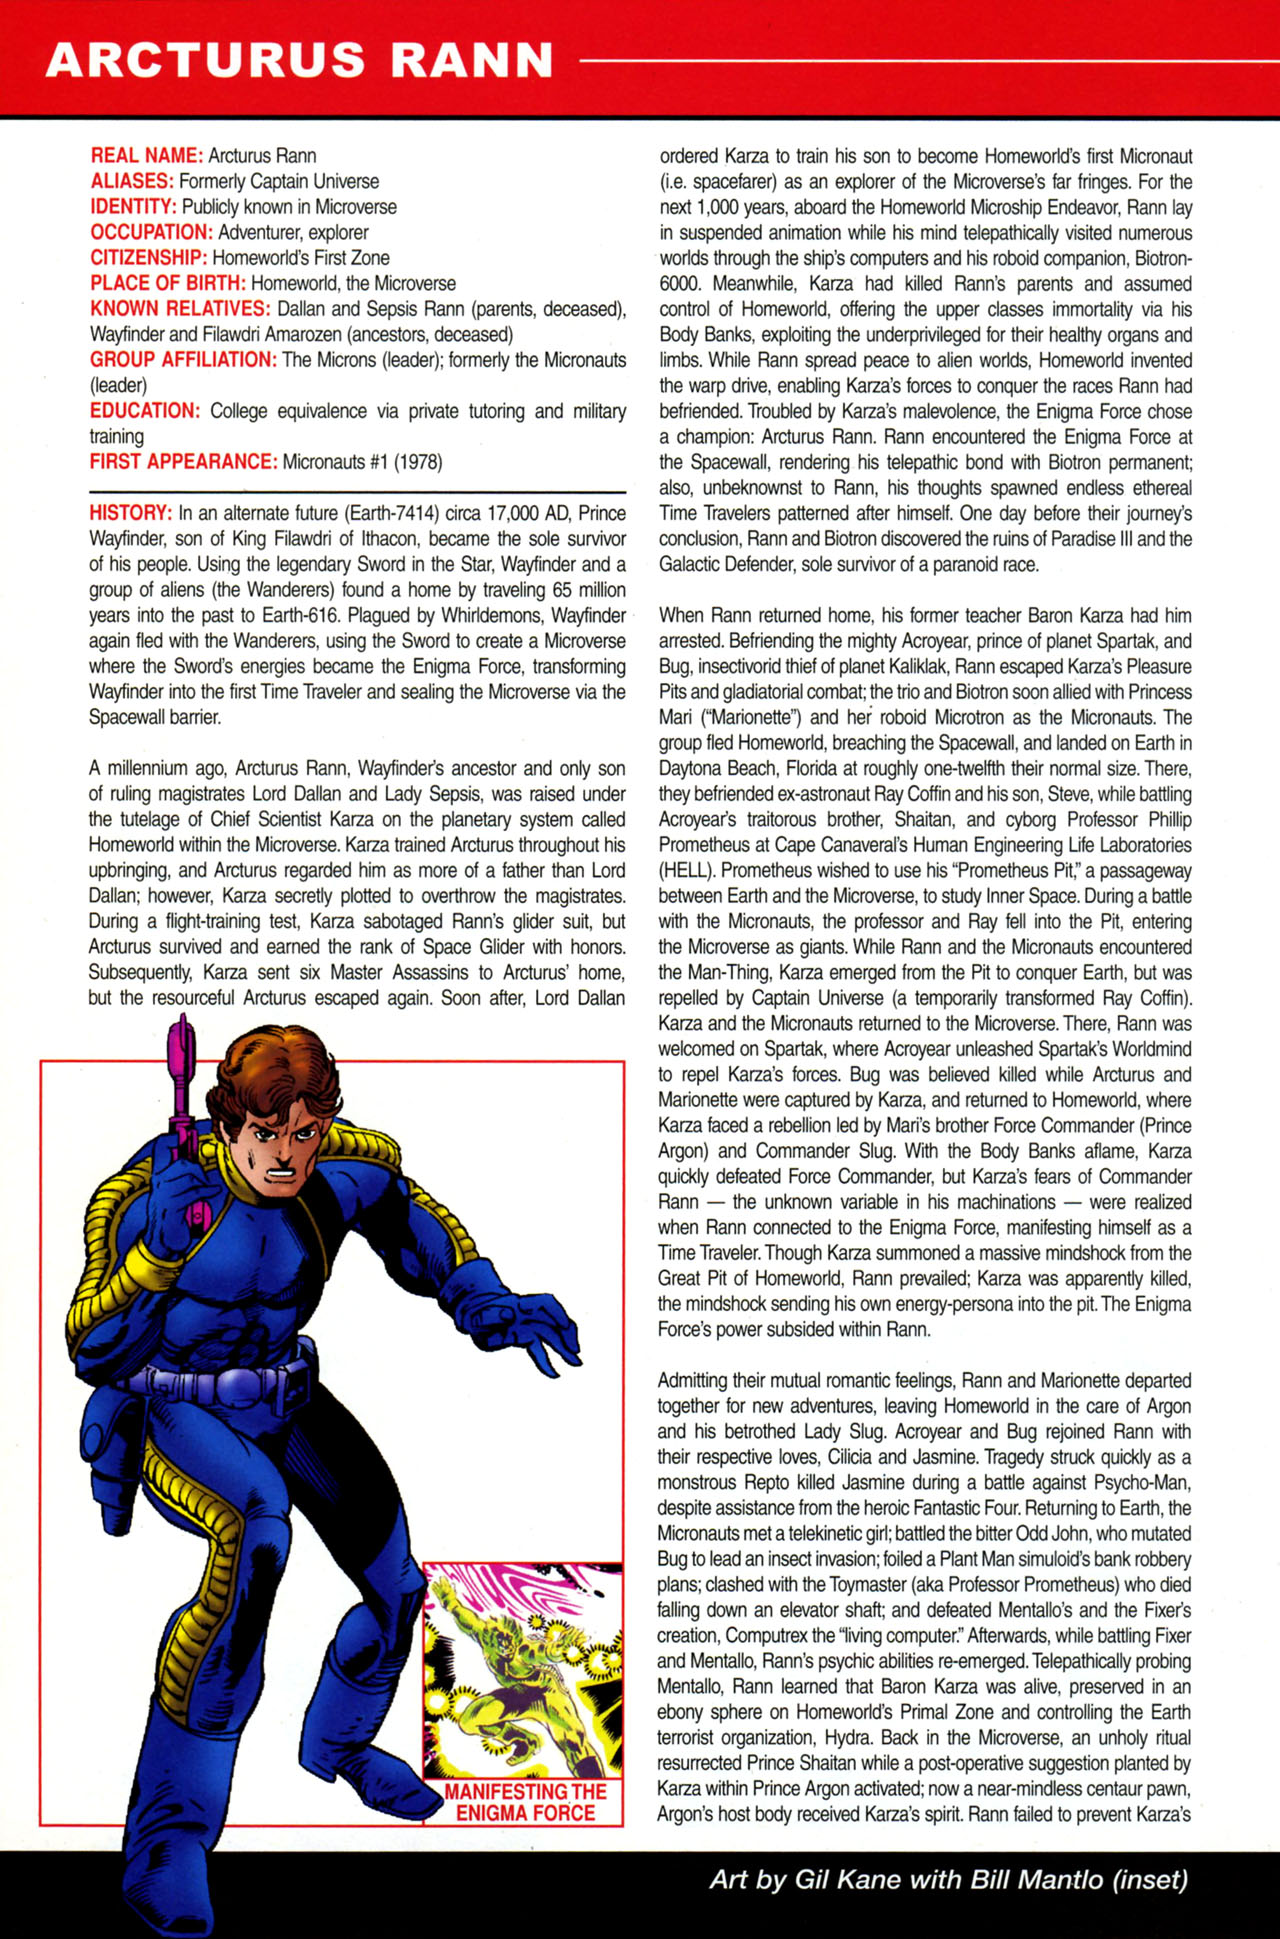 Marvel Universe biography page 1 for Arcturus Rann